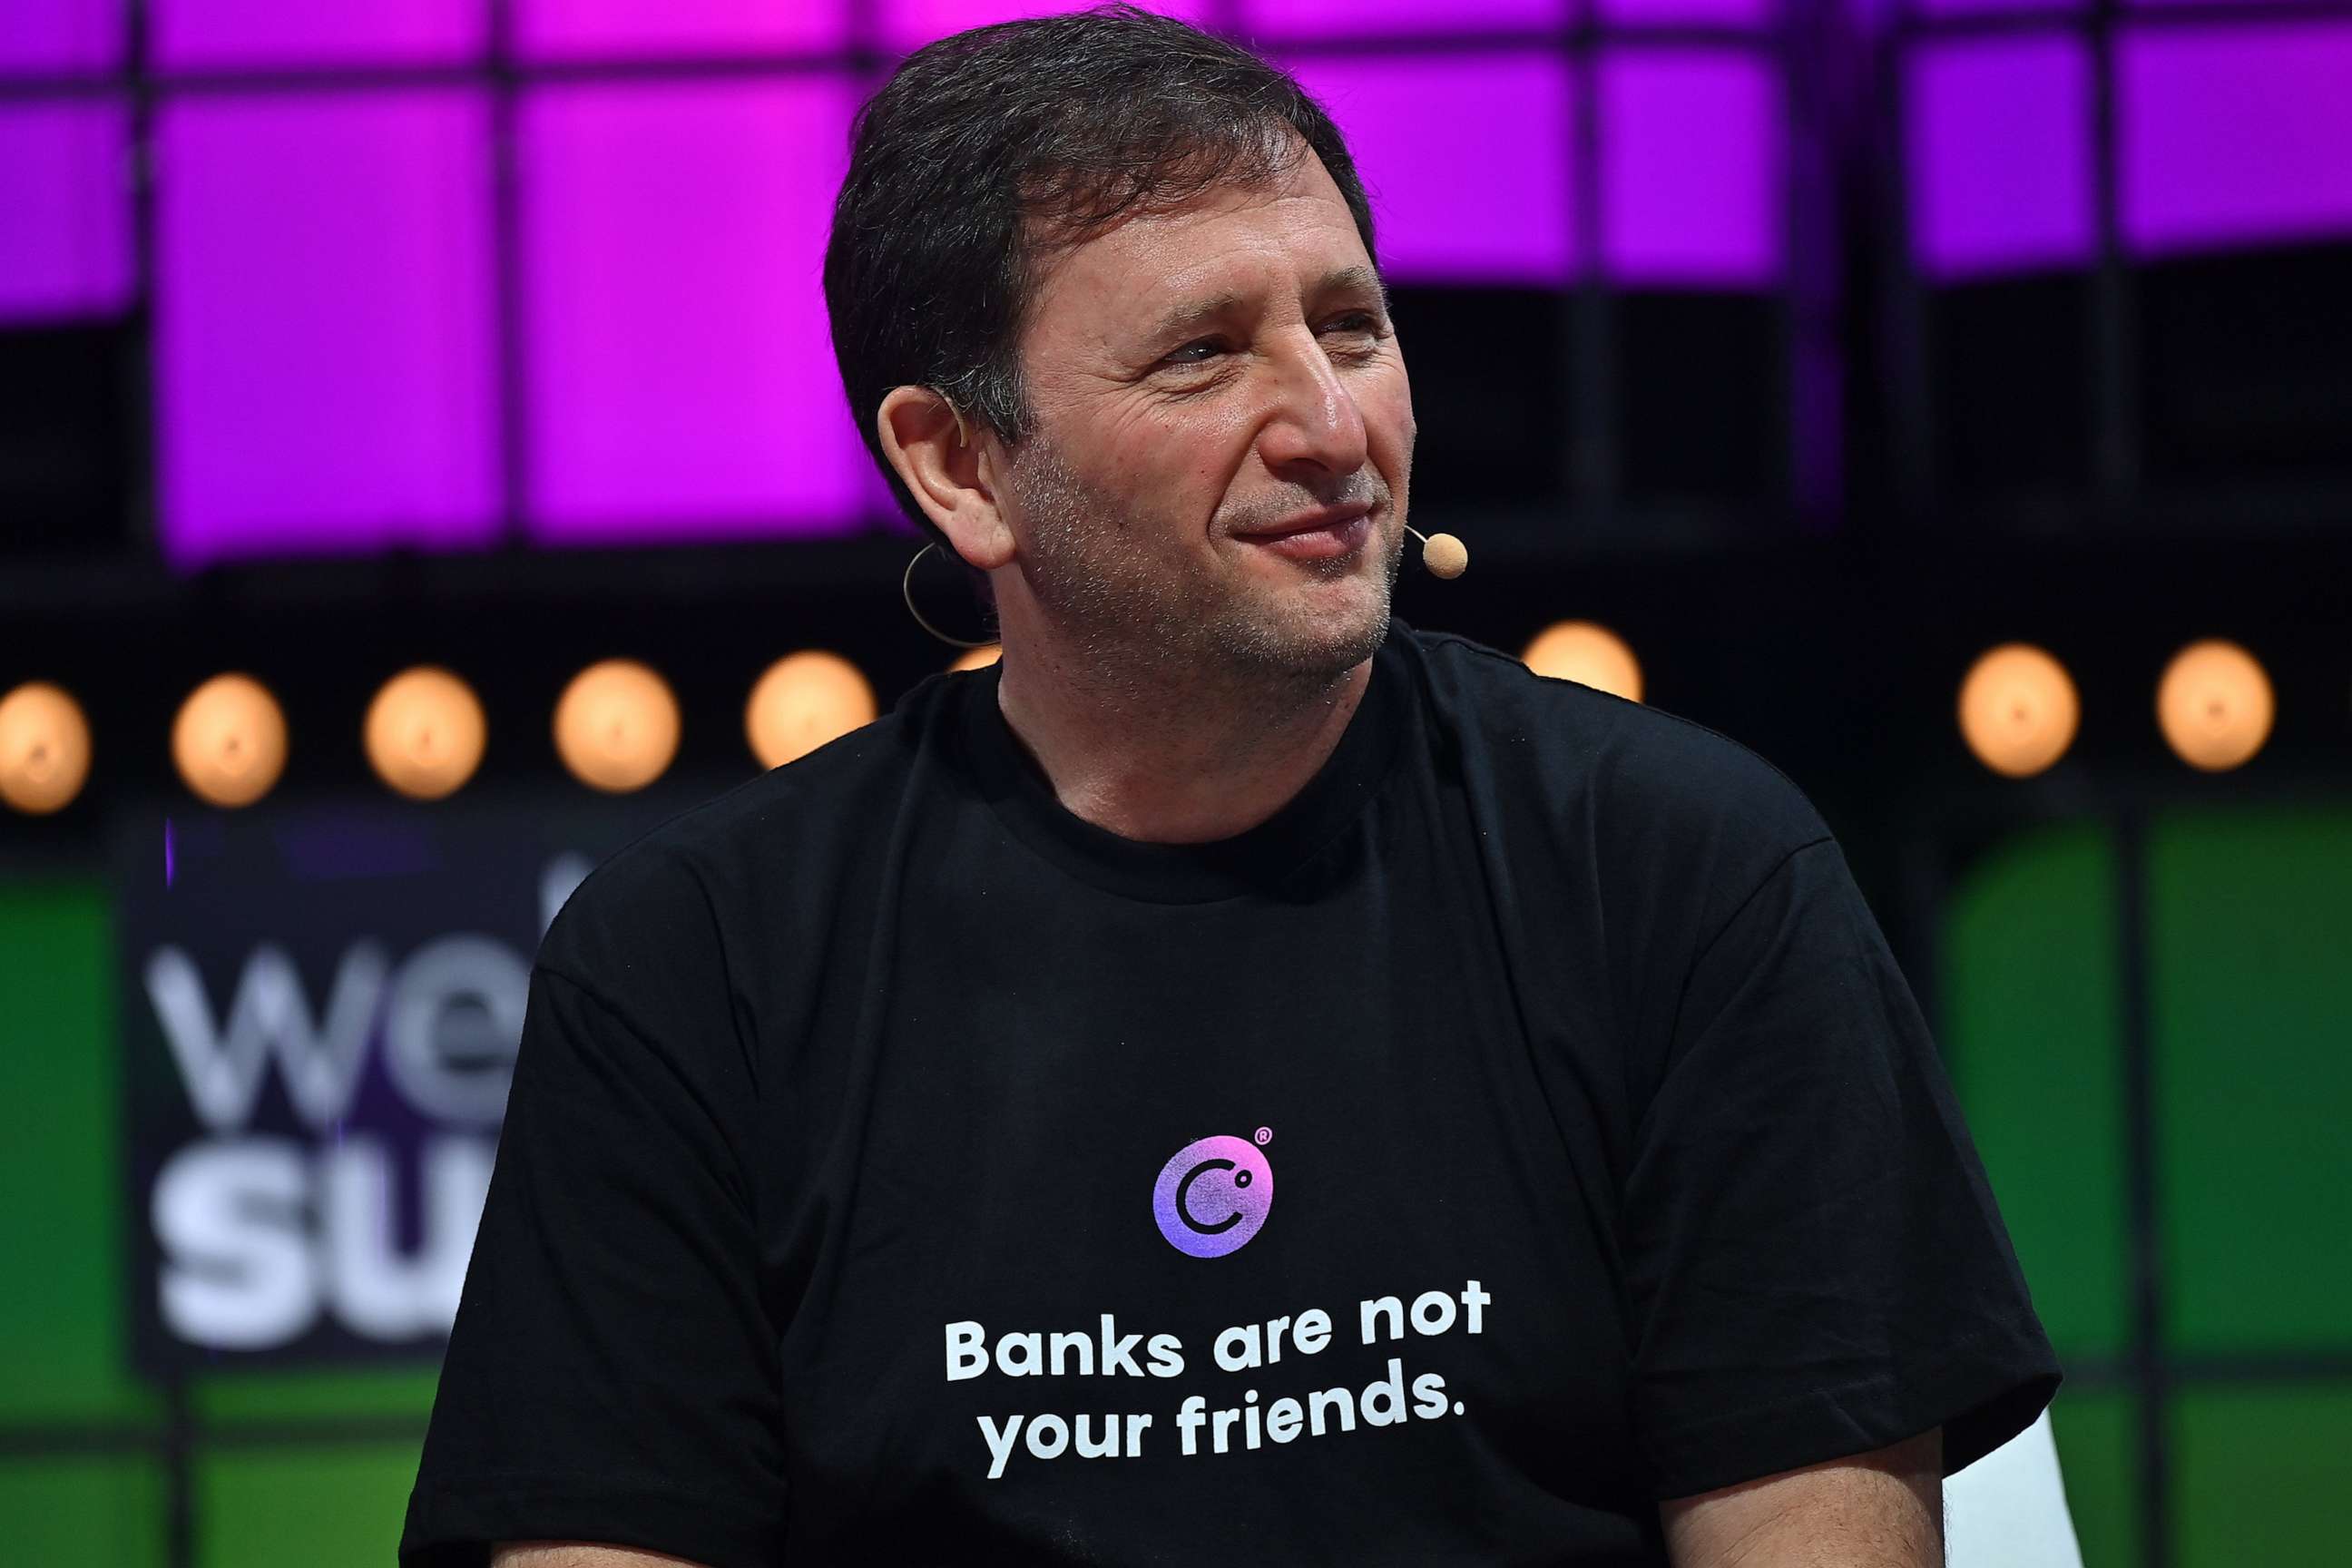 PHOTO: Alex Mashinsky appears on stage of the Web Summit 2021 at the Altice Arena in Lisbon, Portugal, Nov. 4, 2021.